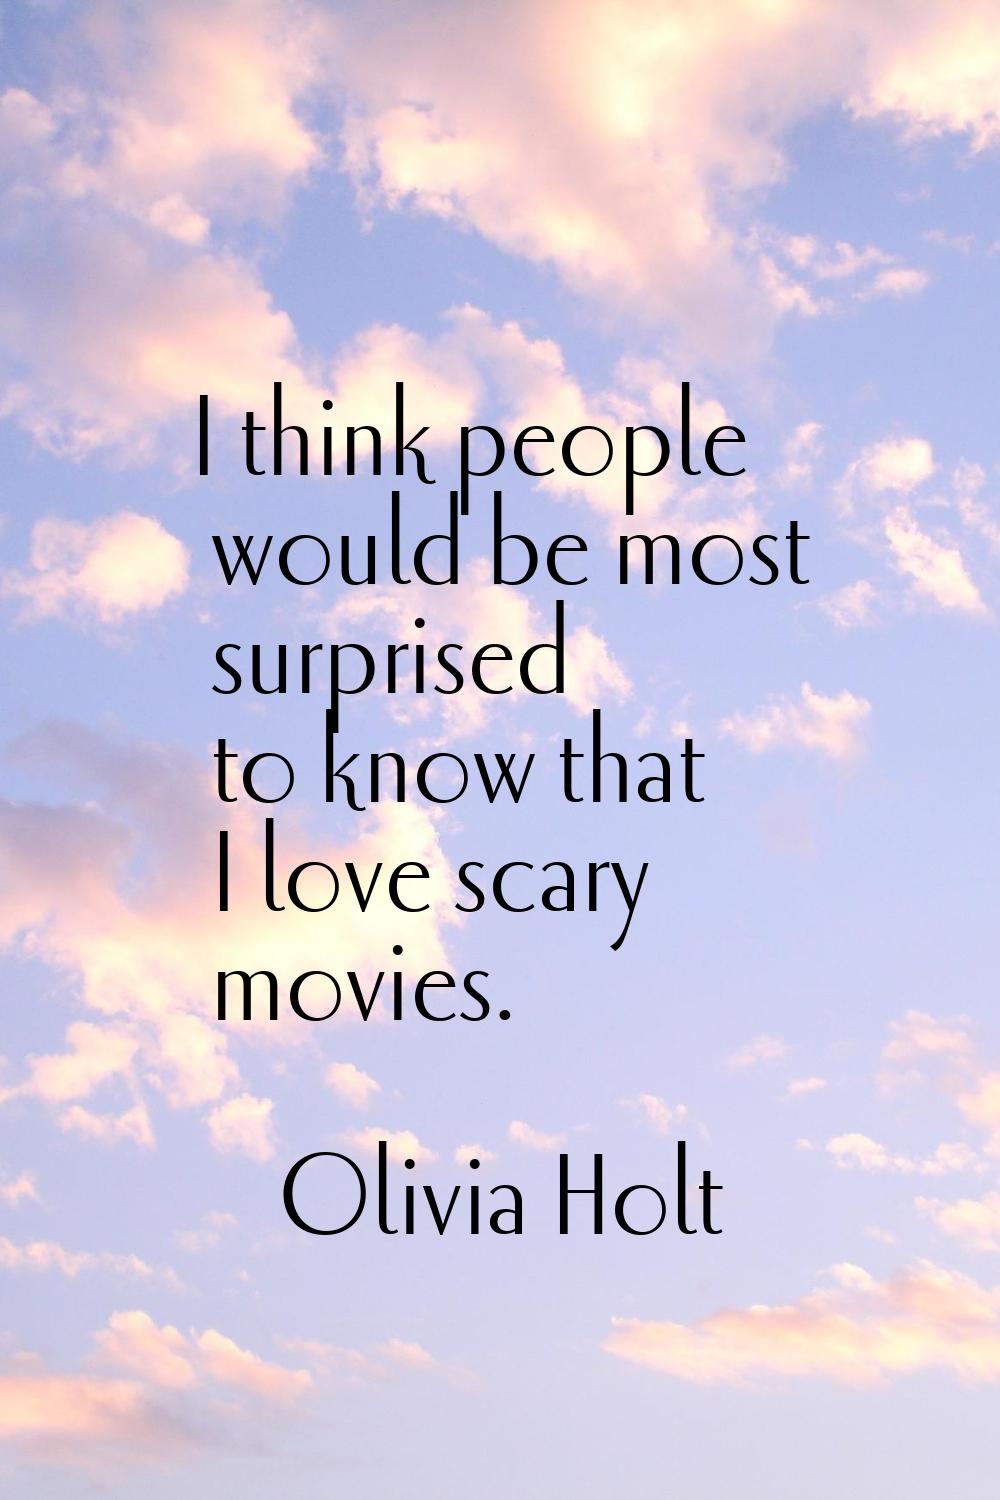 I think people would be most surprised to know that I love scary movies.